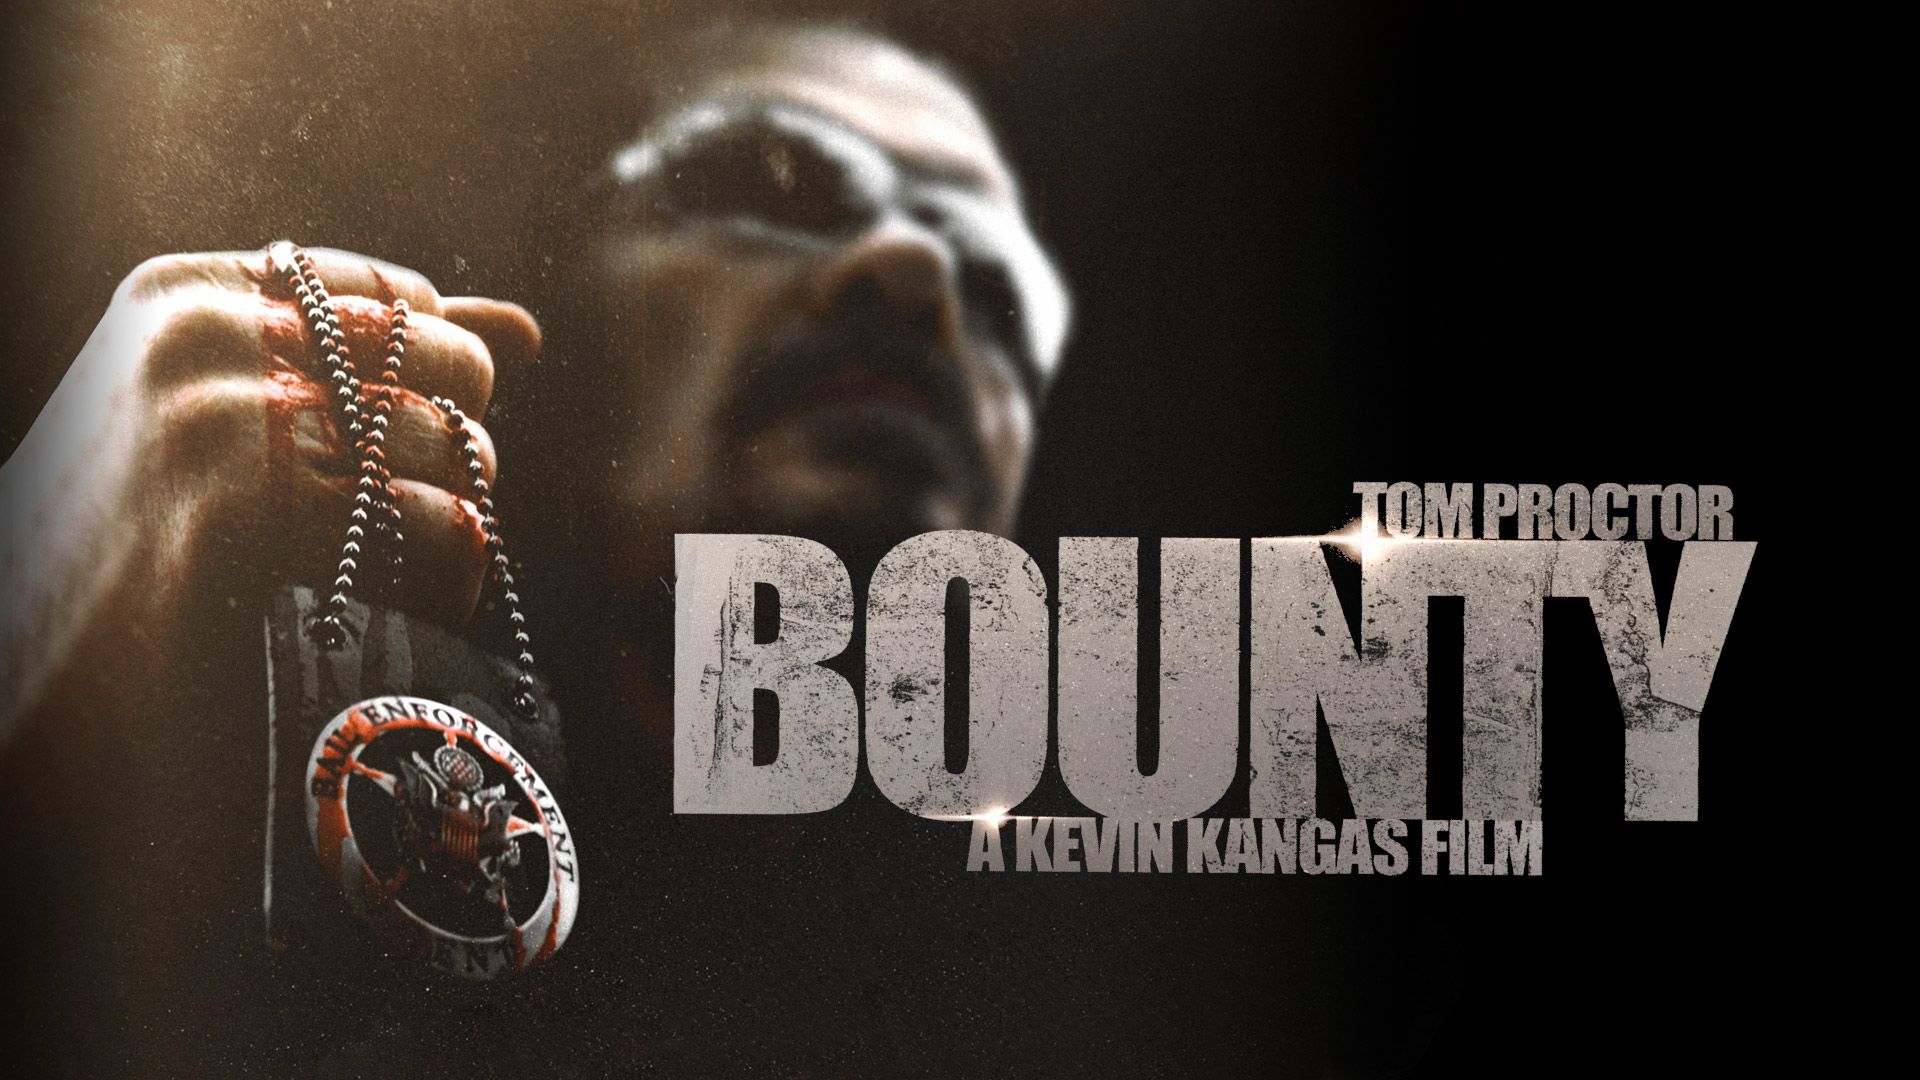 southland bounty hunters where to watch